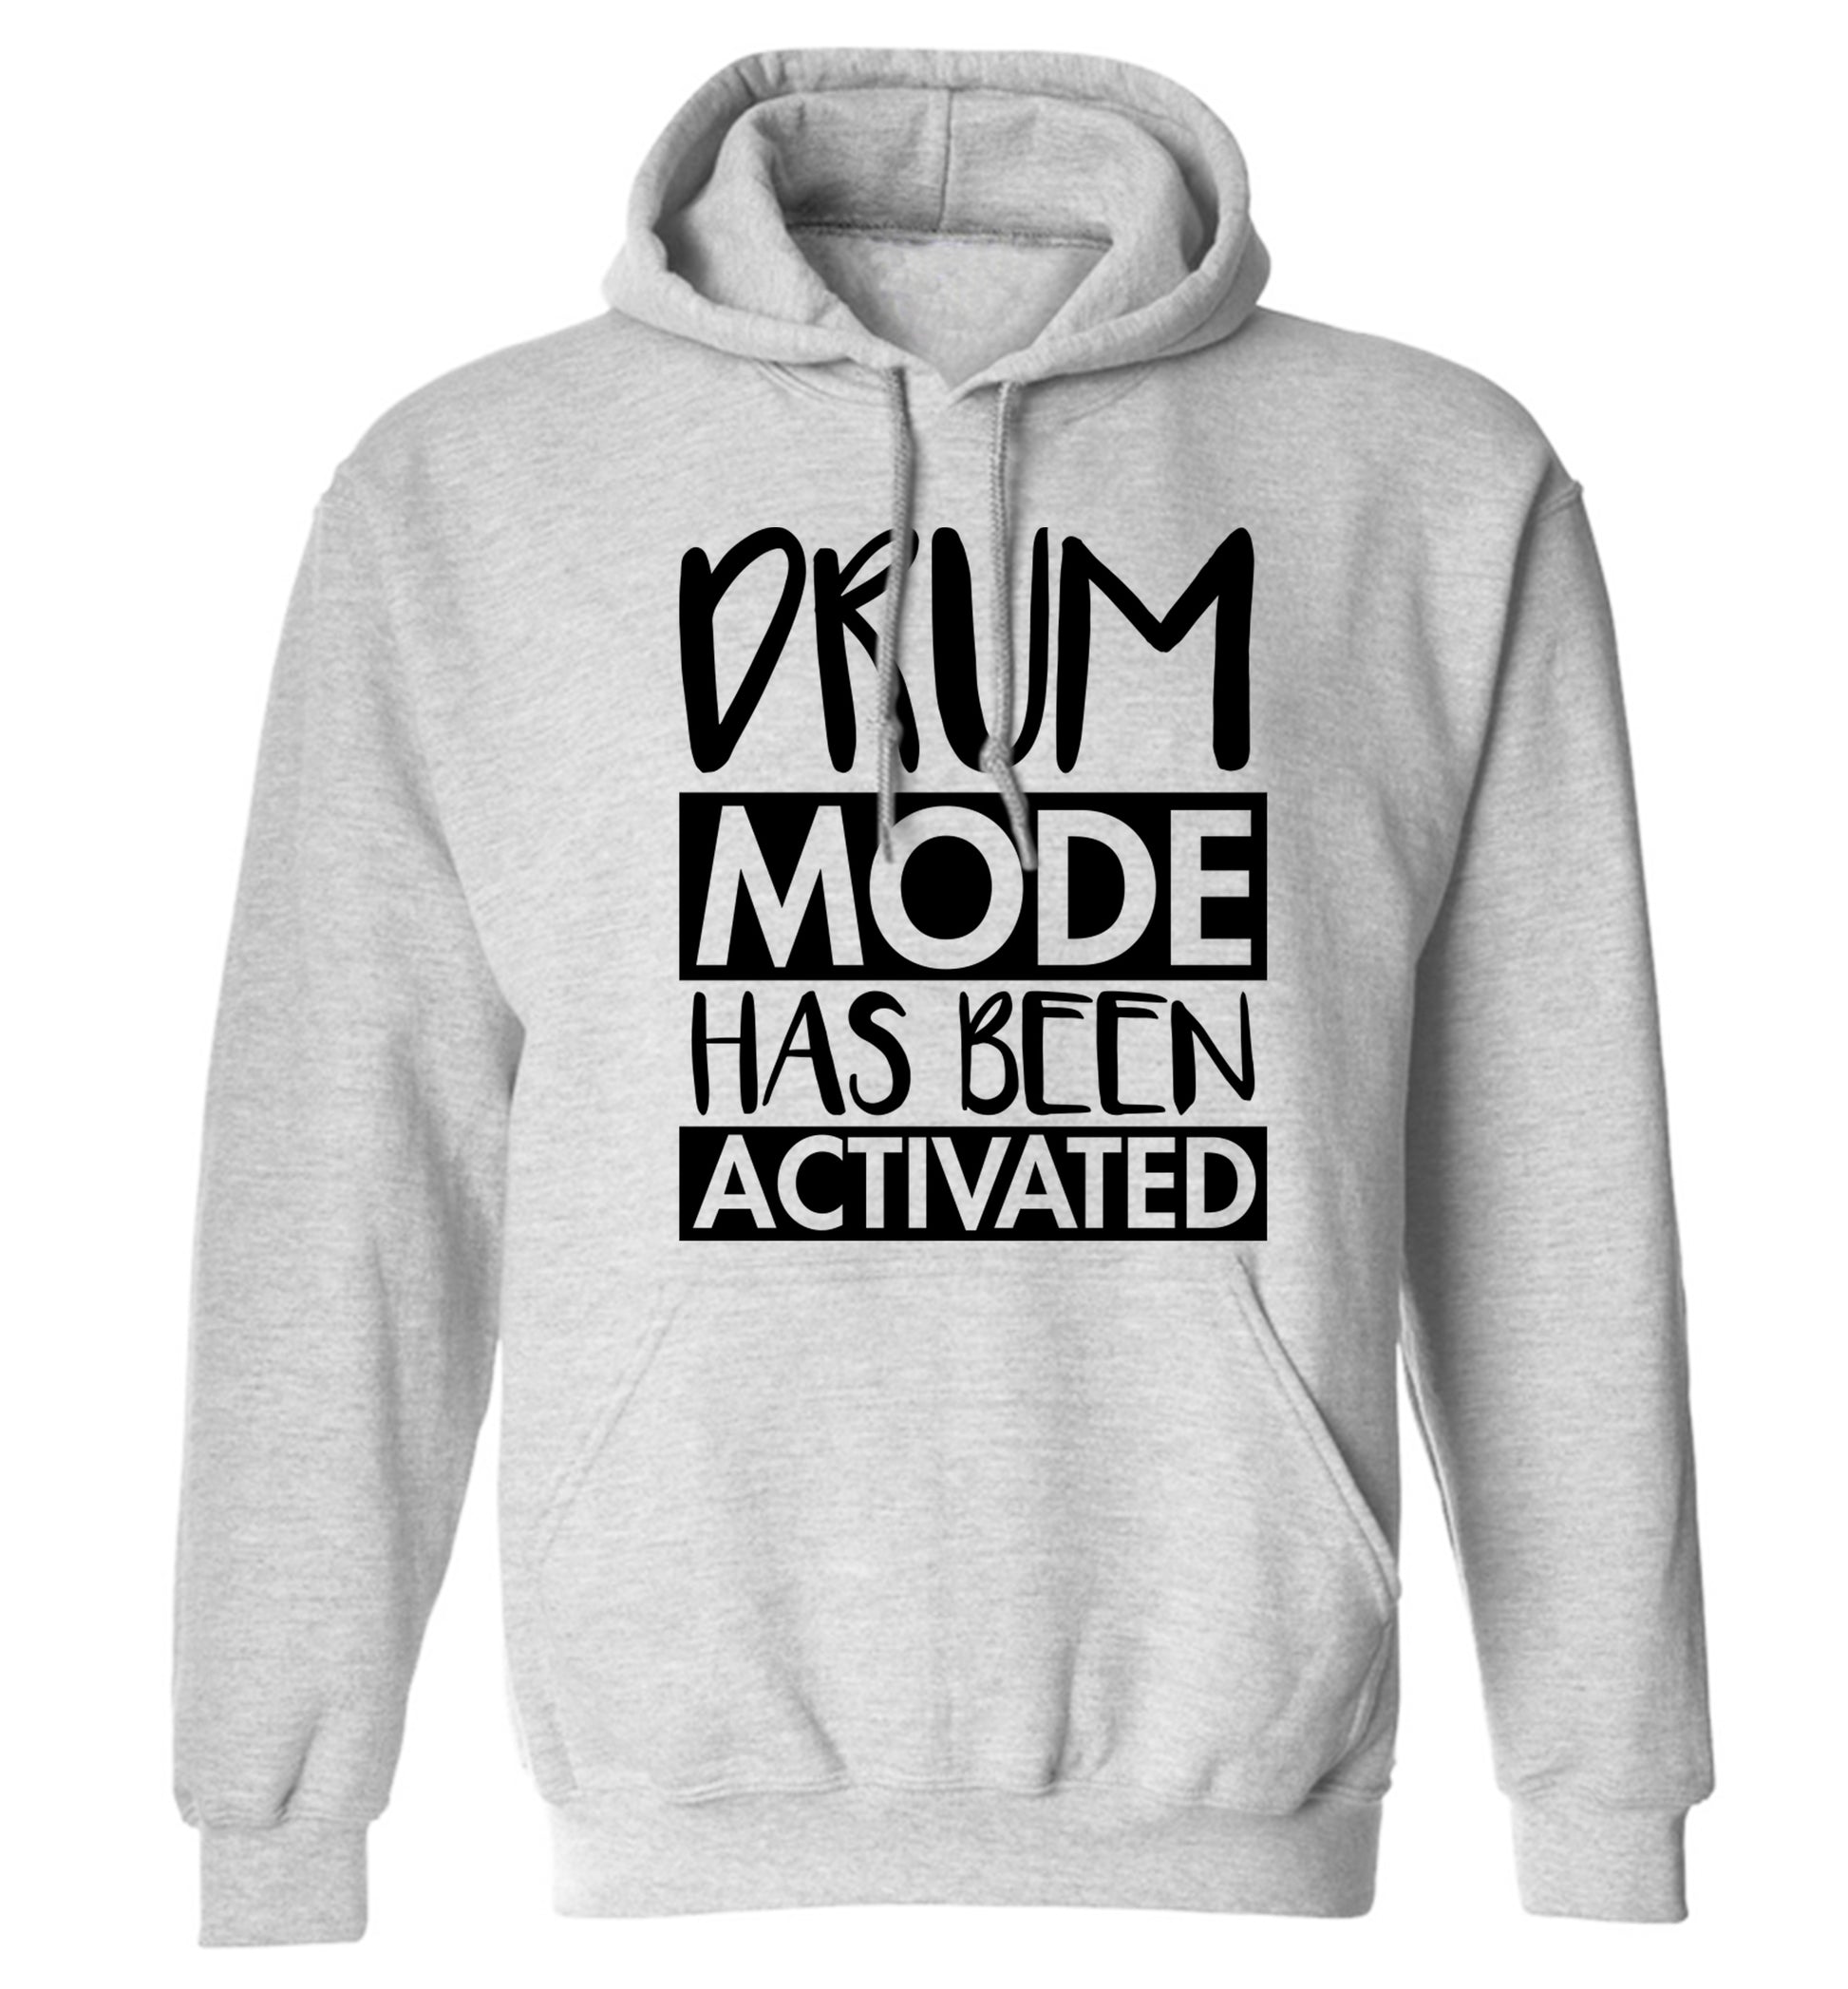 Drum mode activated adults unisexgrey hoodie 2XL